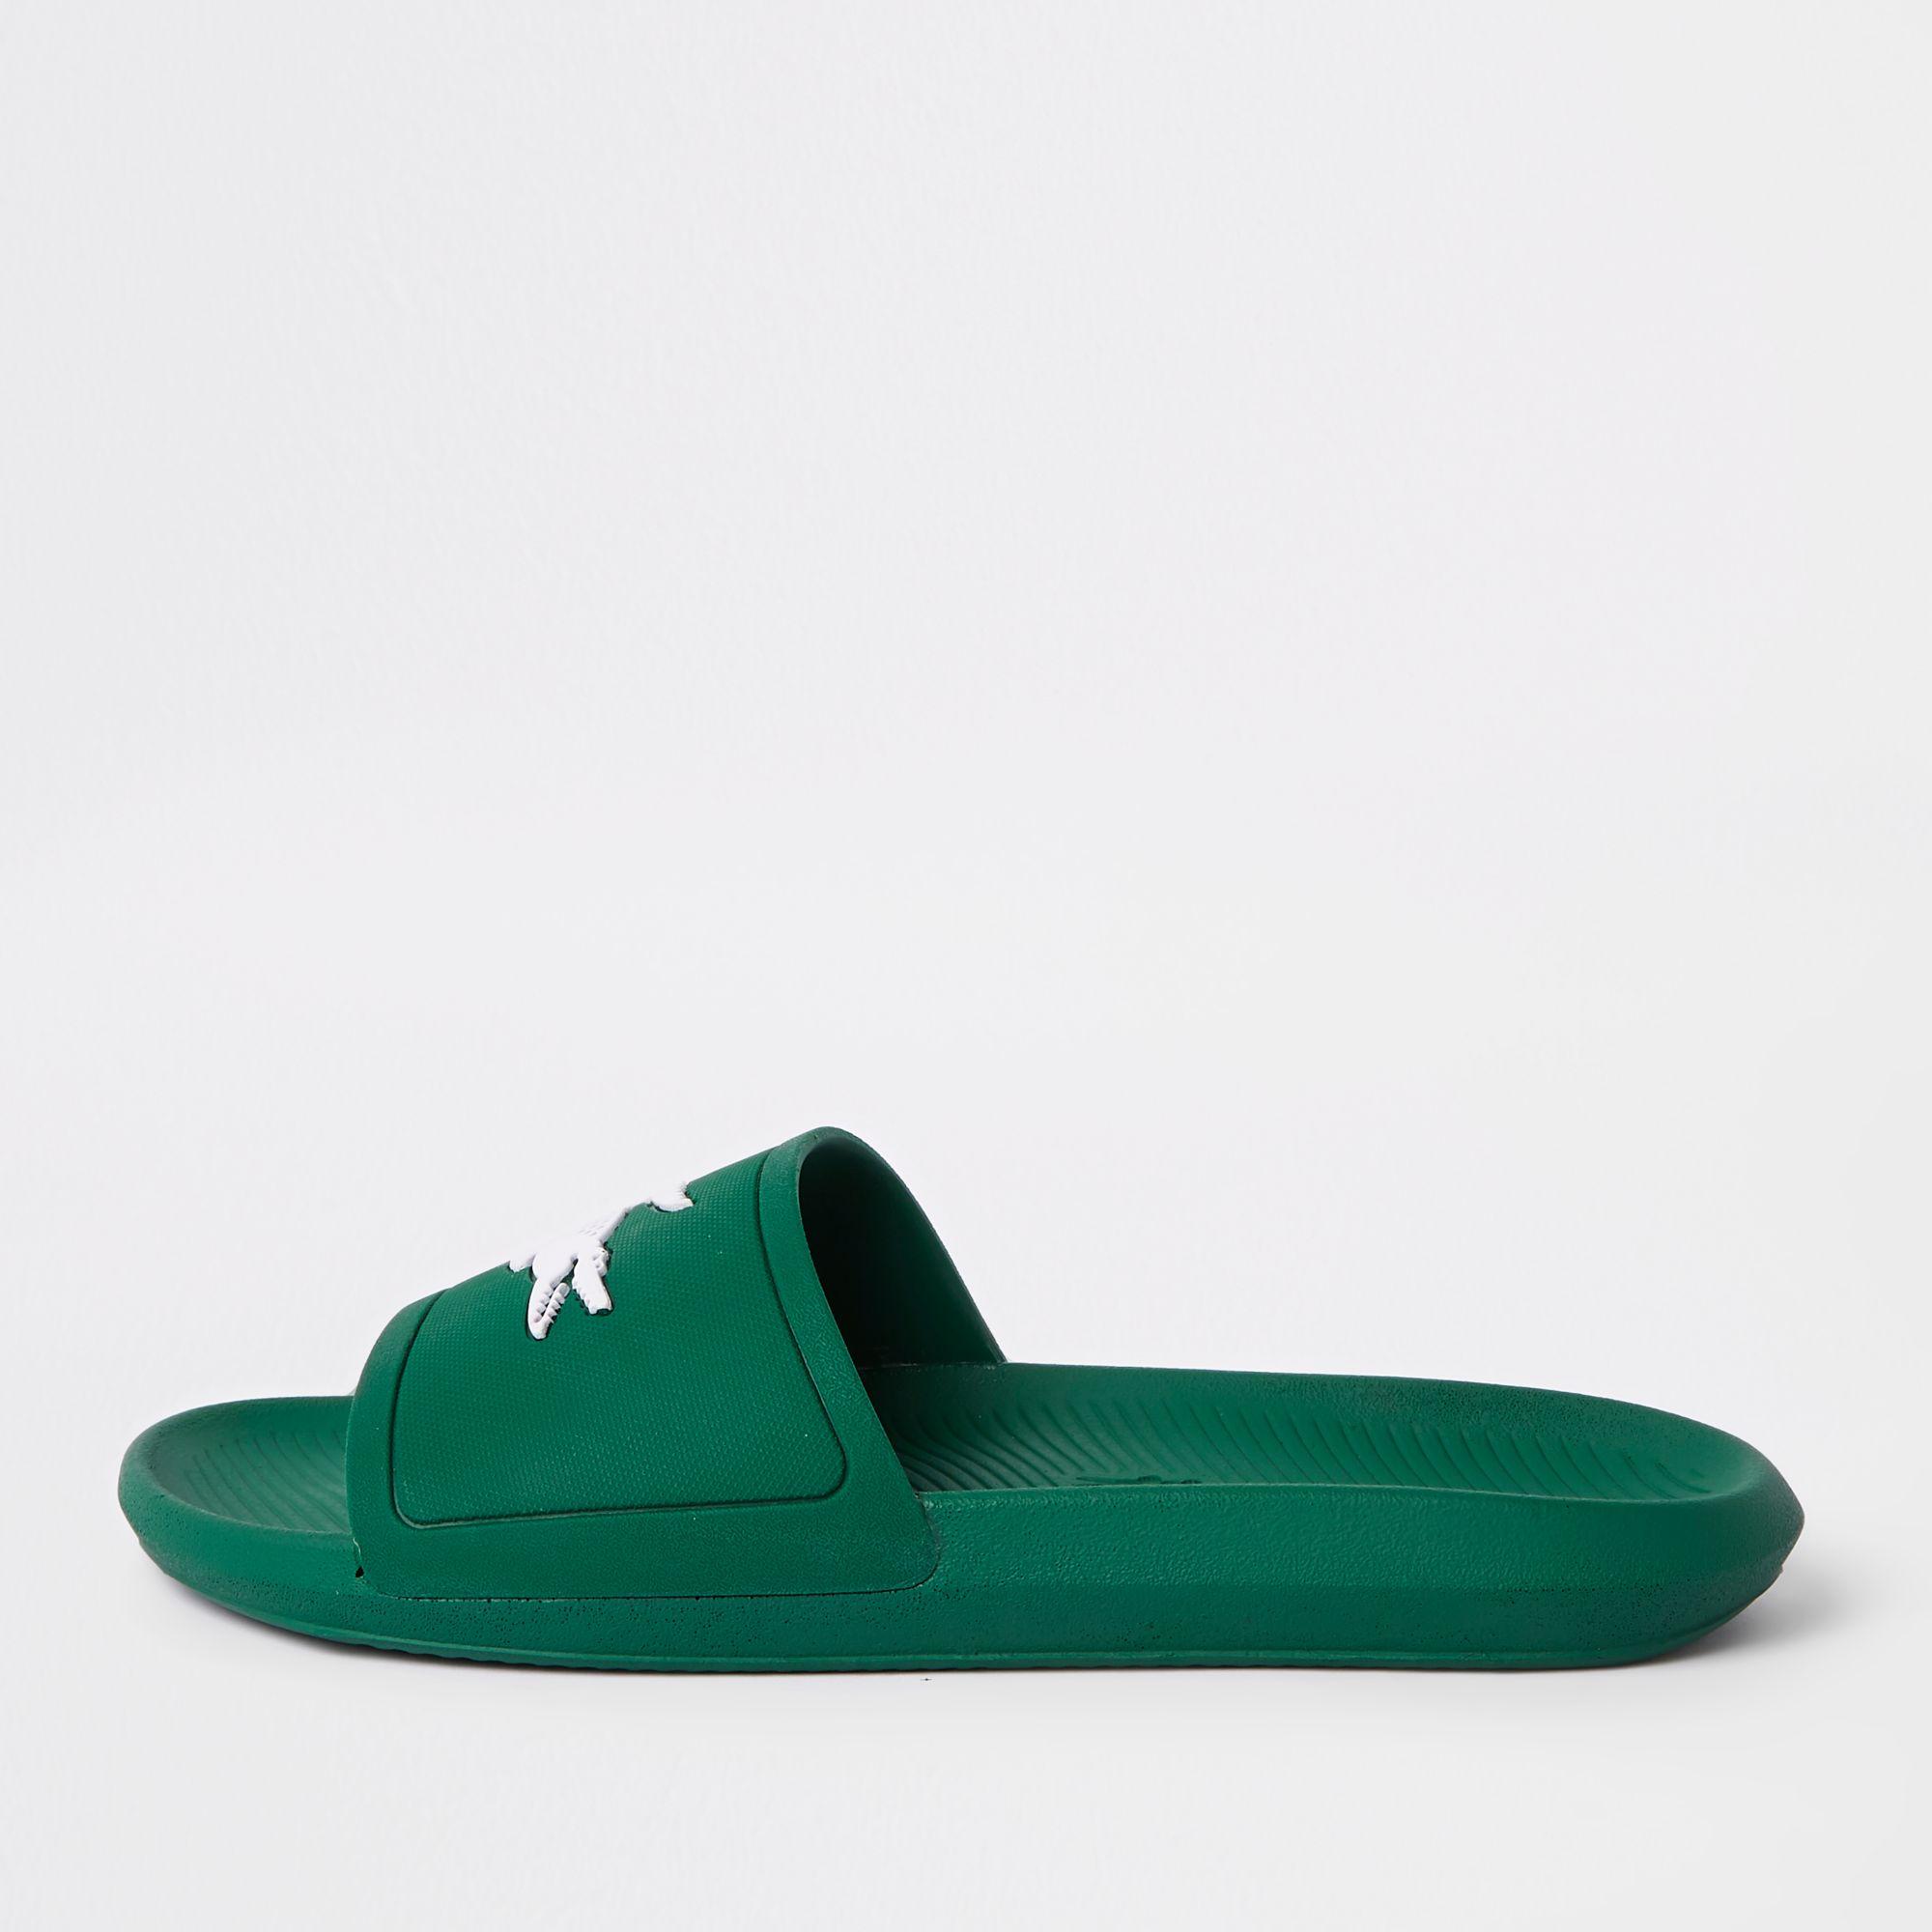 River Island Lacoste Green Sliders for 